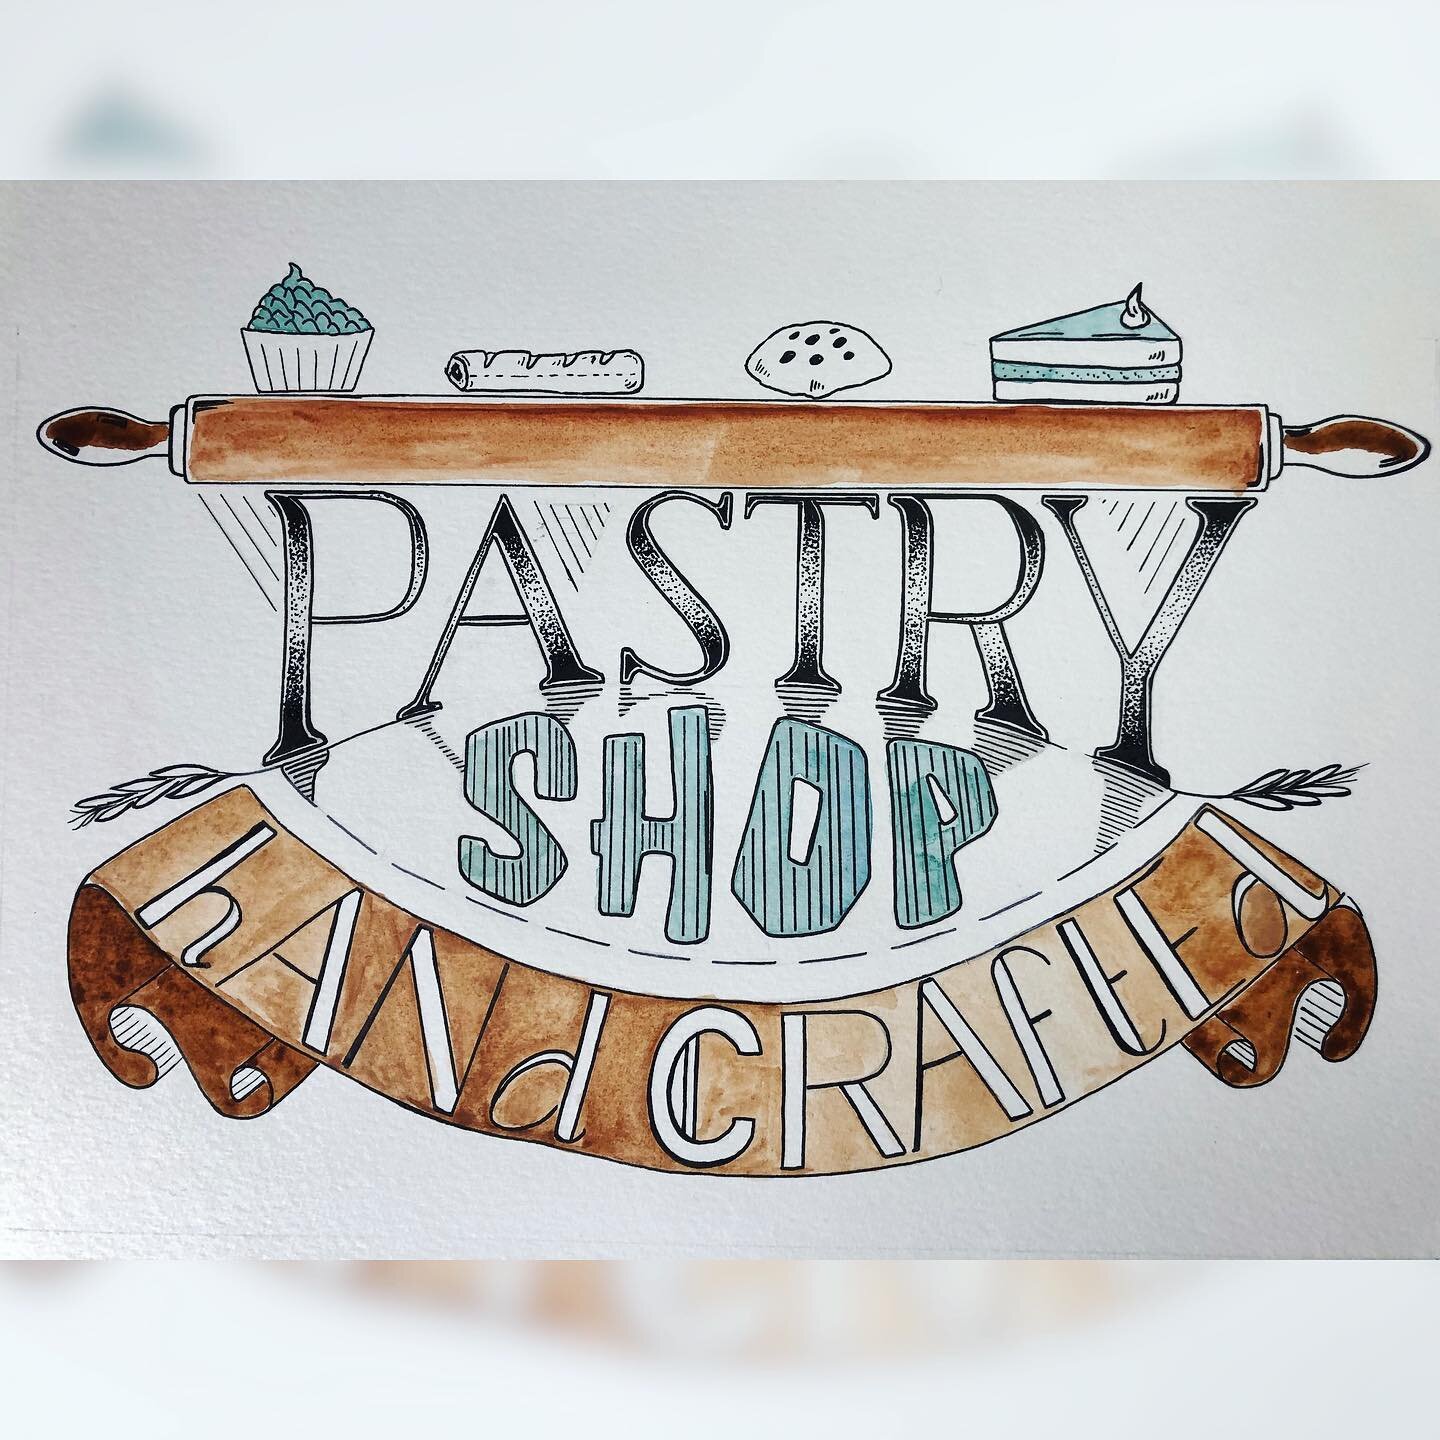 Bakery Mural Design #2 
I had a go at mocking up some colour on this one to try and help visualise what could work. Verdict is I&rsquo;m not a fan of the brown I mixed but the pastel greeny blue is the one. 
.
.
.
.
#wallmural #muralart #graphicdesig